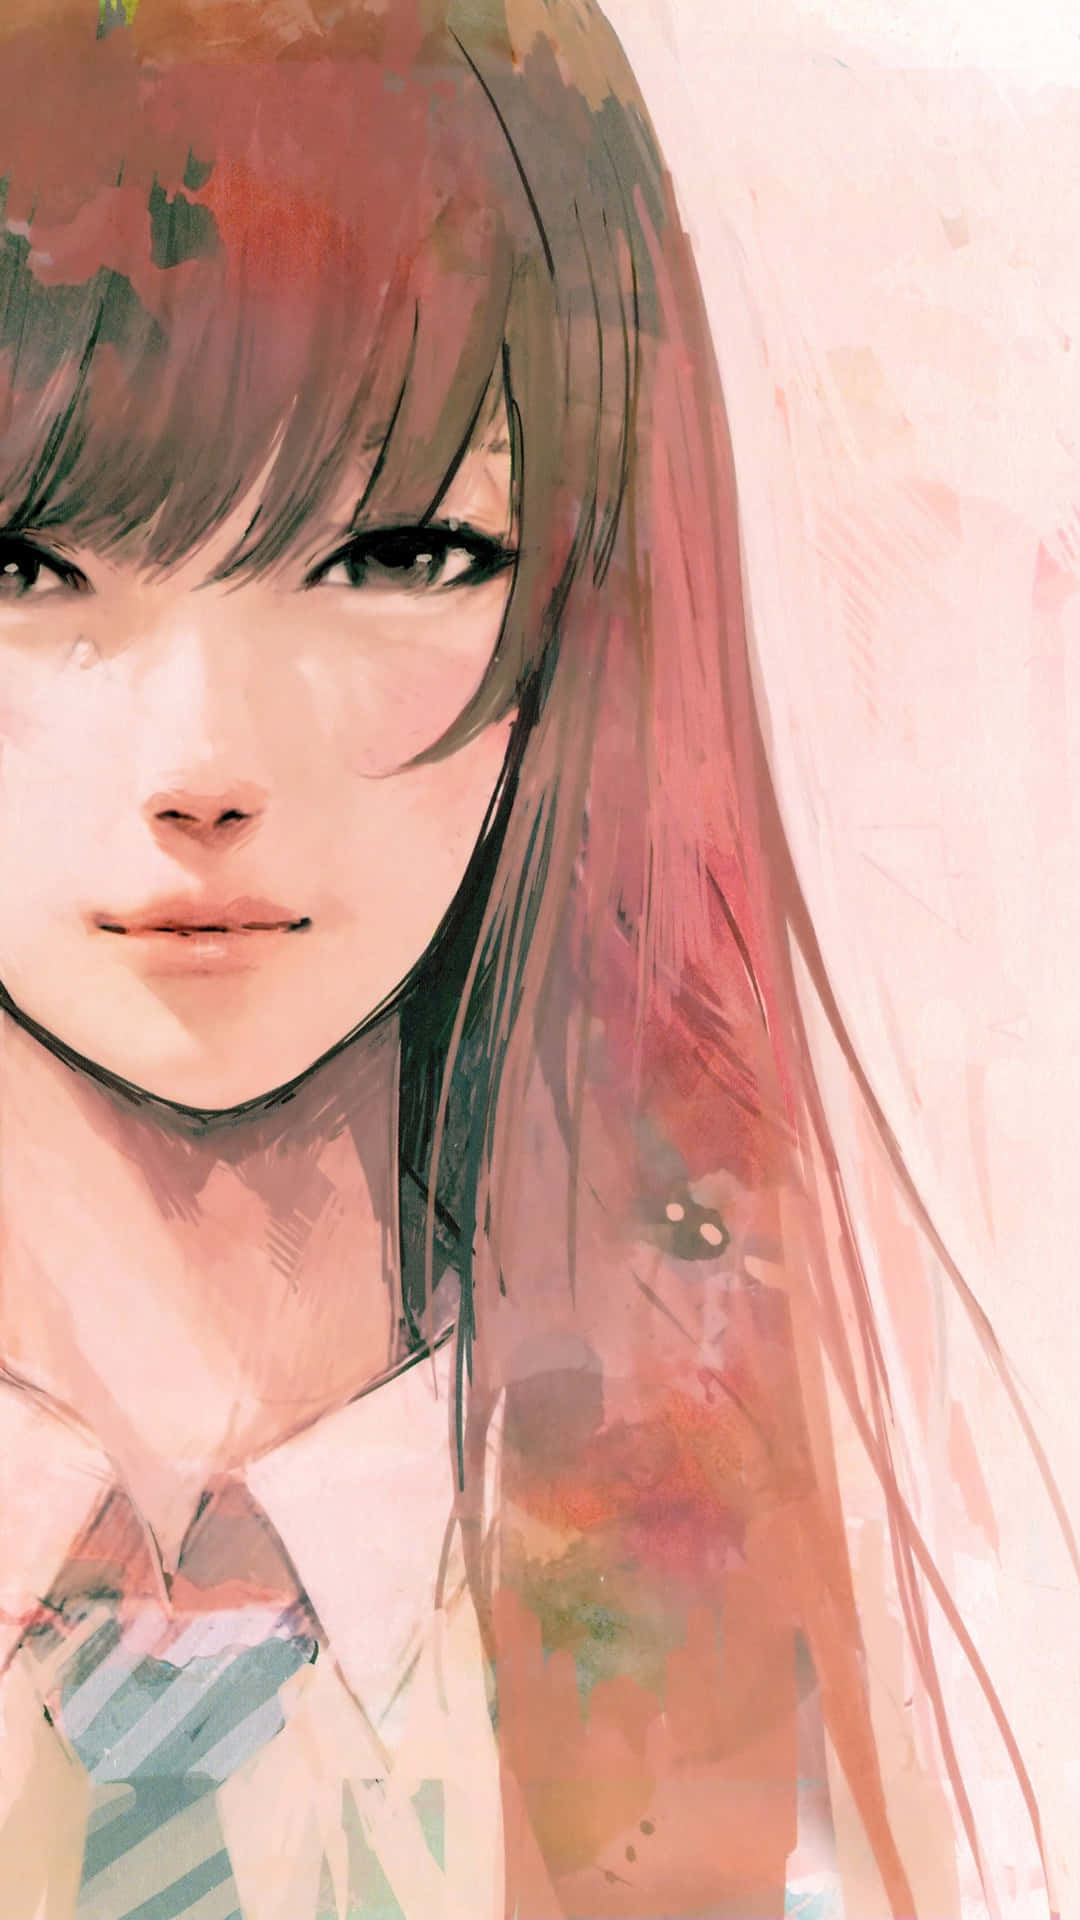 Get lost in an amazing world with Manga